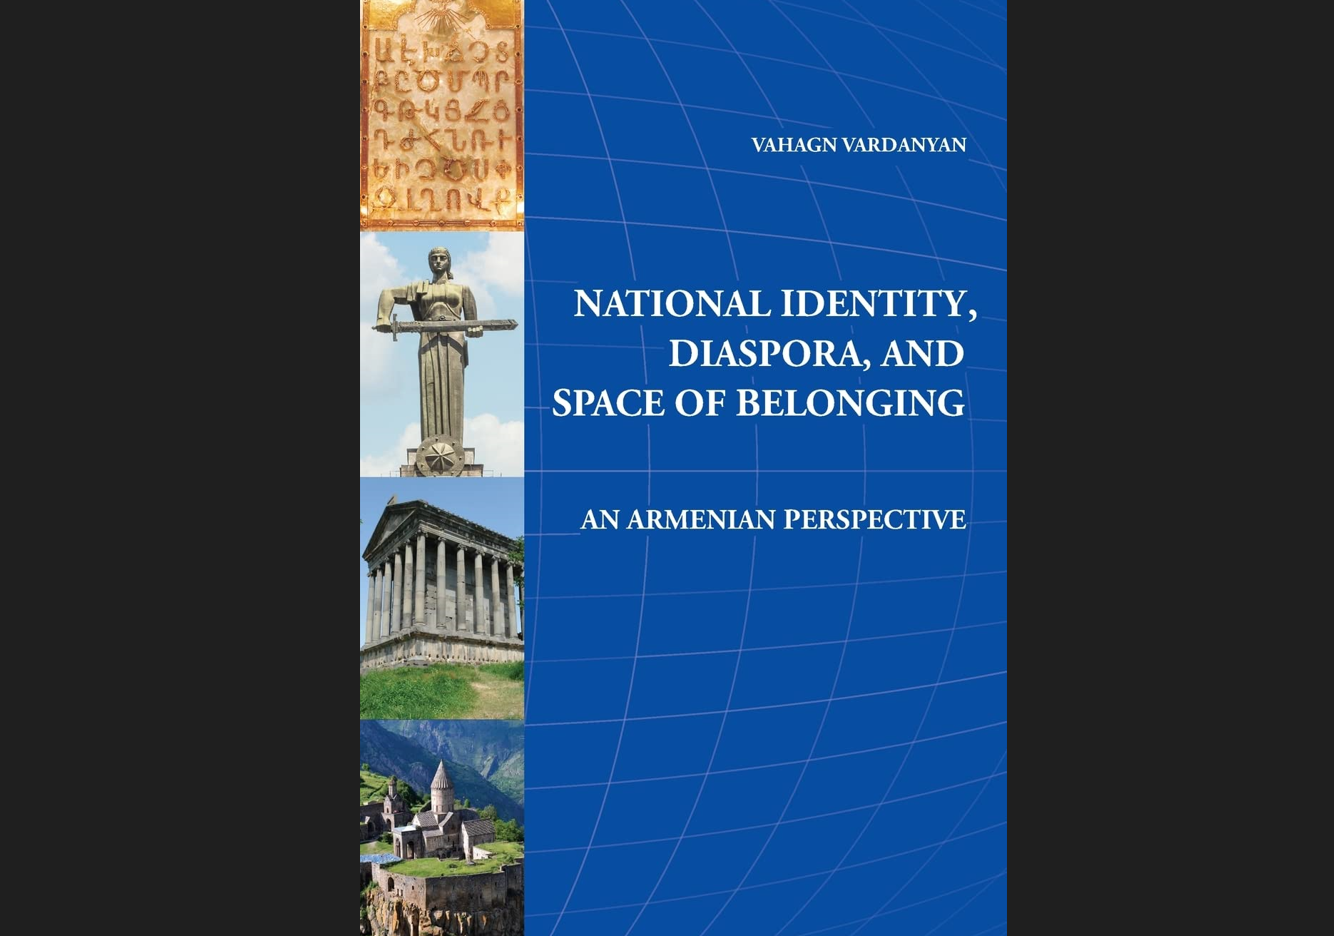 Book Review: National Identity, Diaspora, And Space of Belonging: An Armenian Perspective